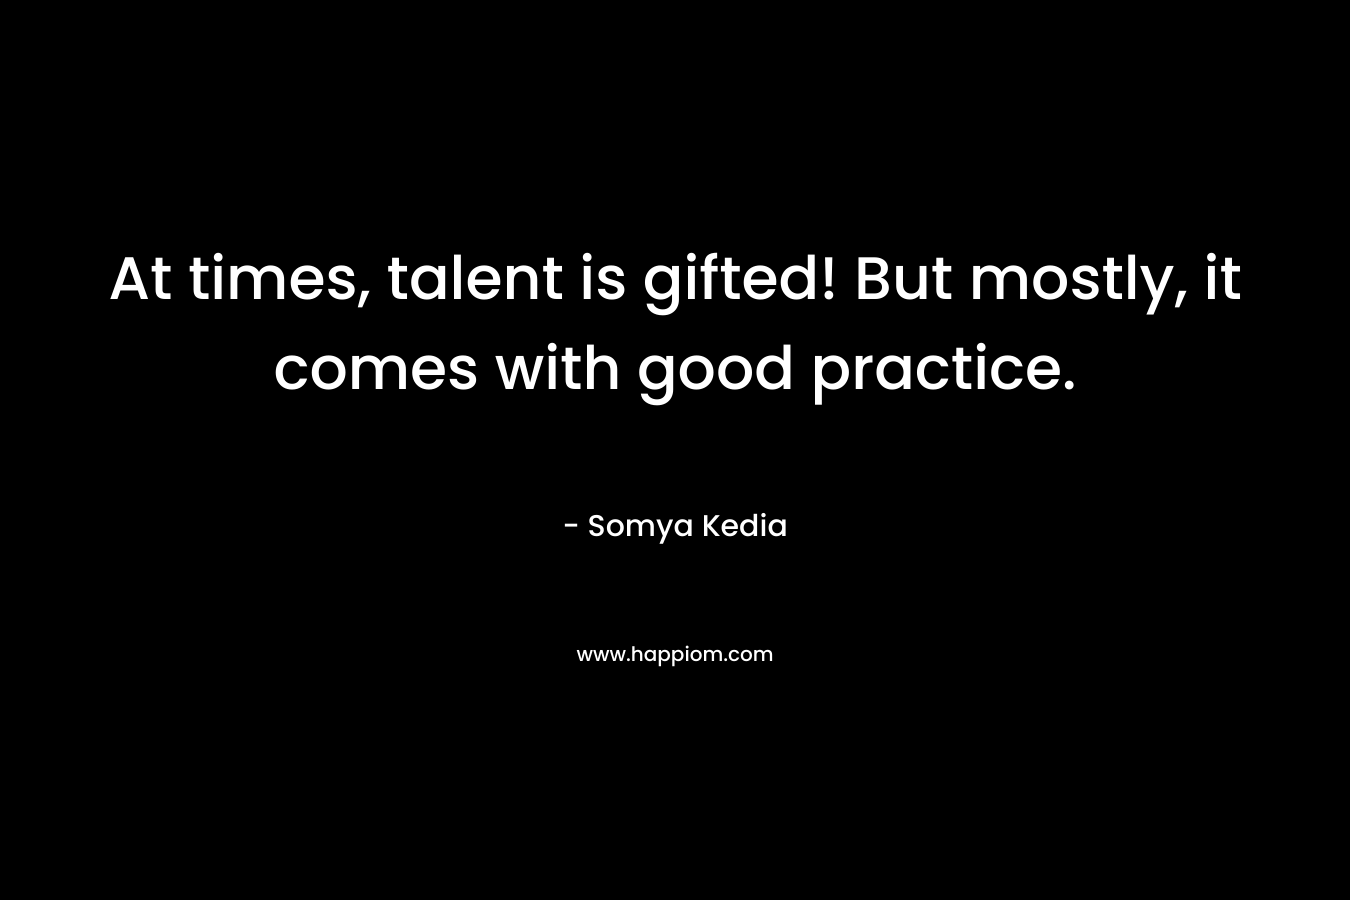 At times, talent is gifted! But mostly, it comes with good practice. – Somya Kedia